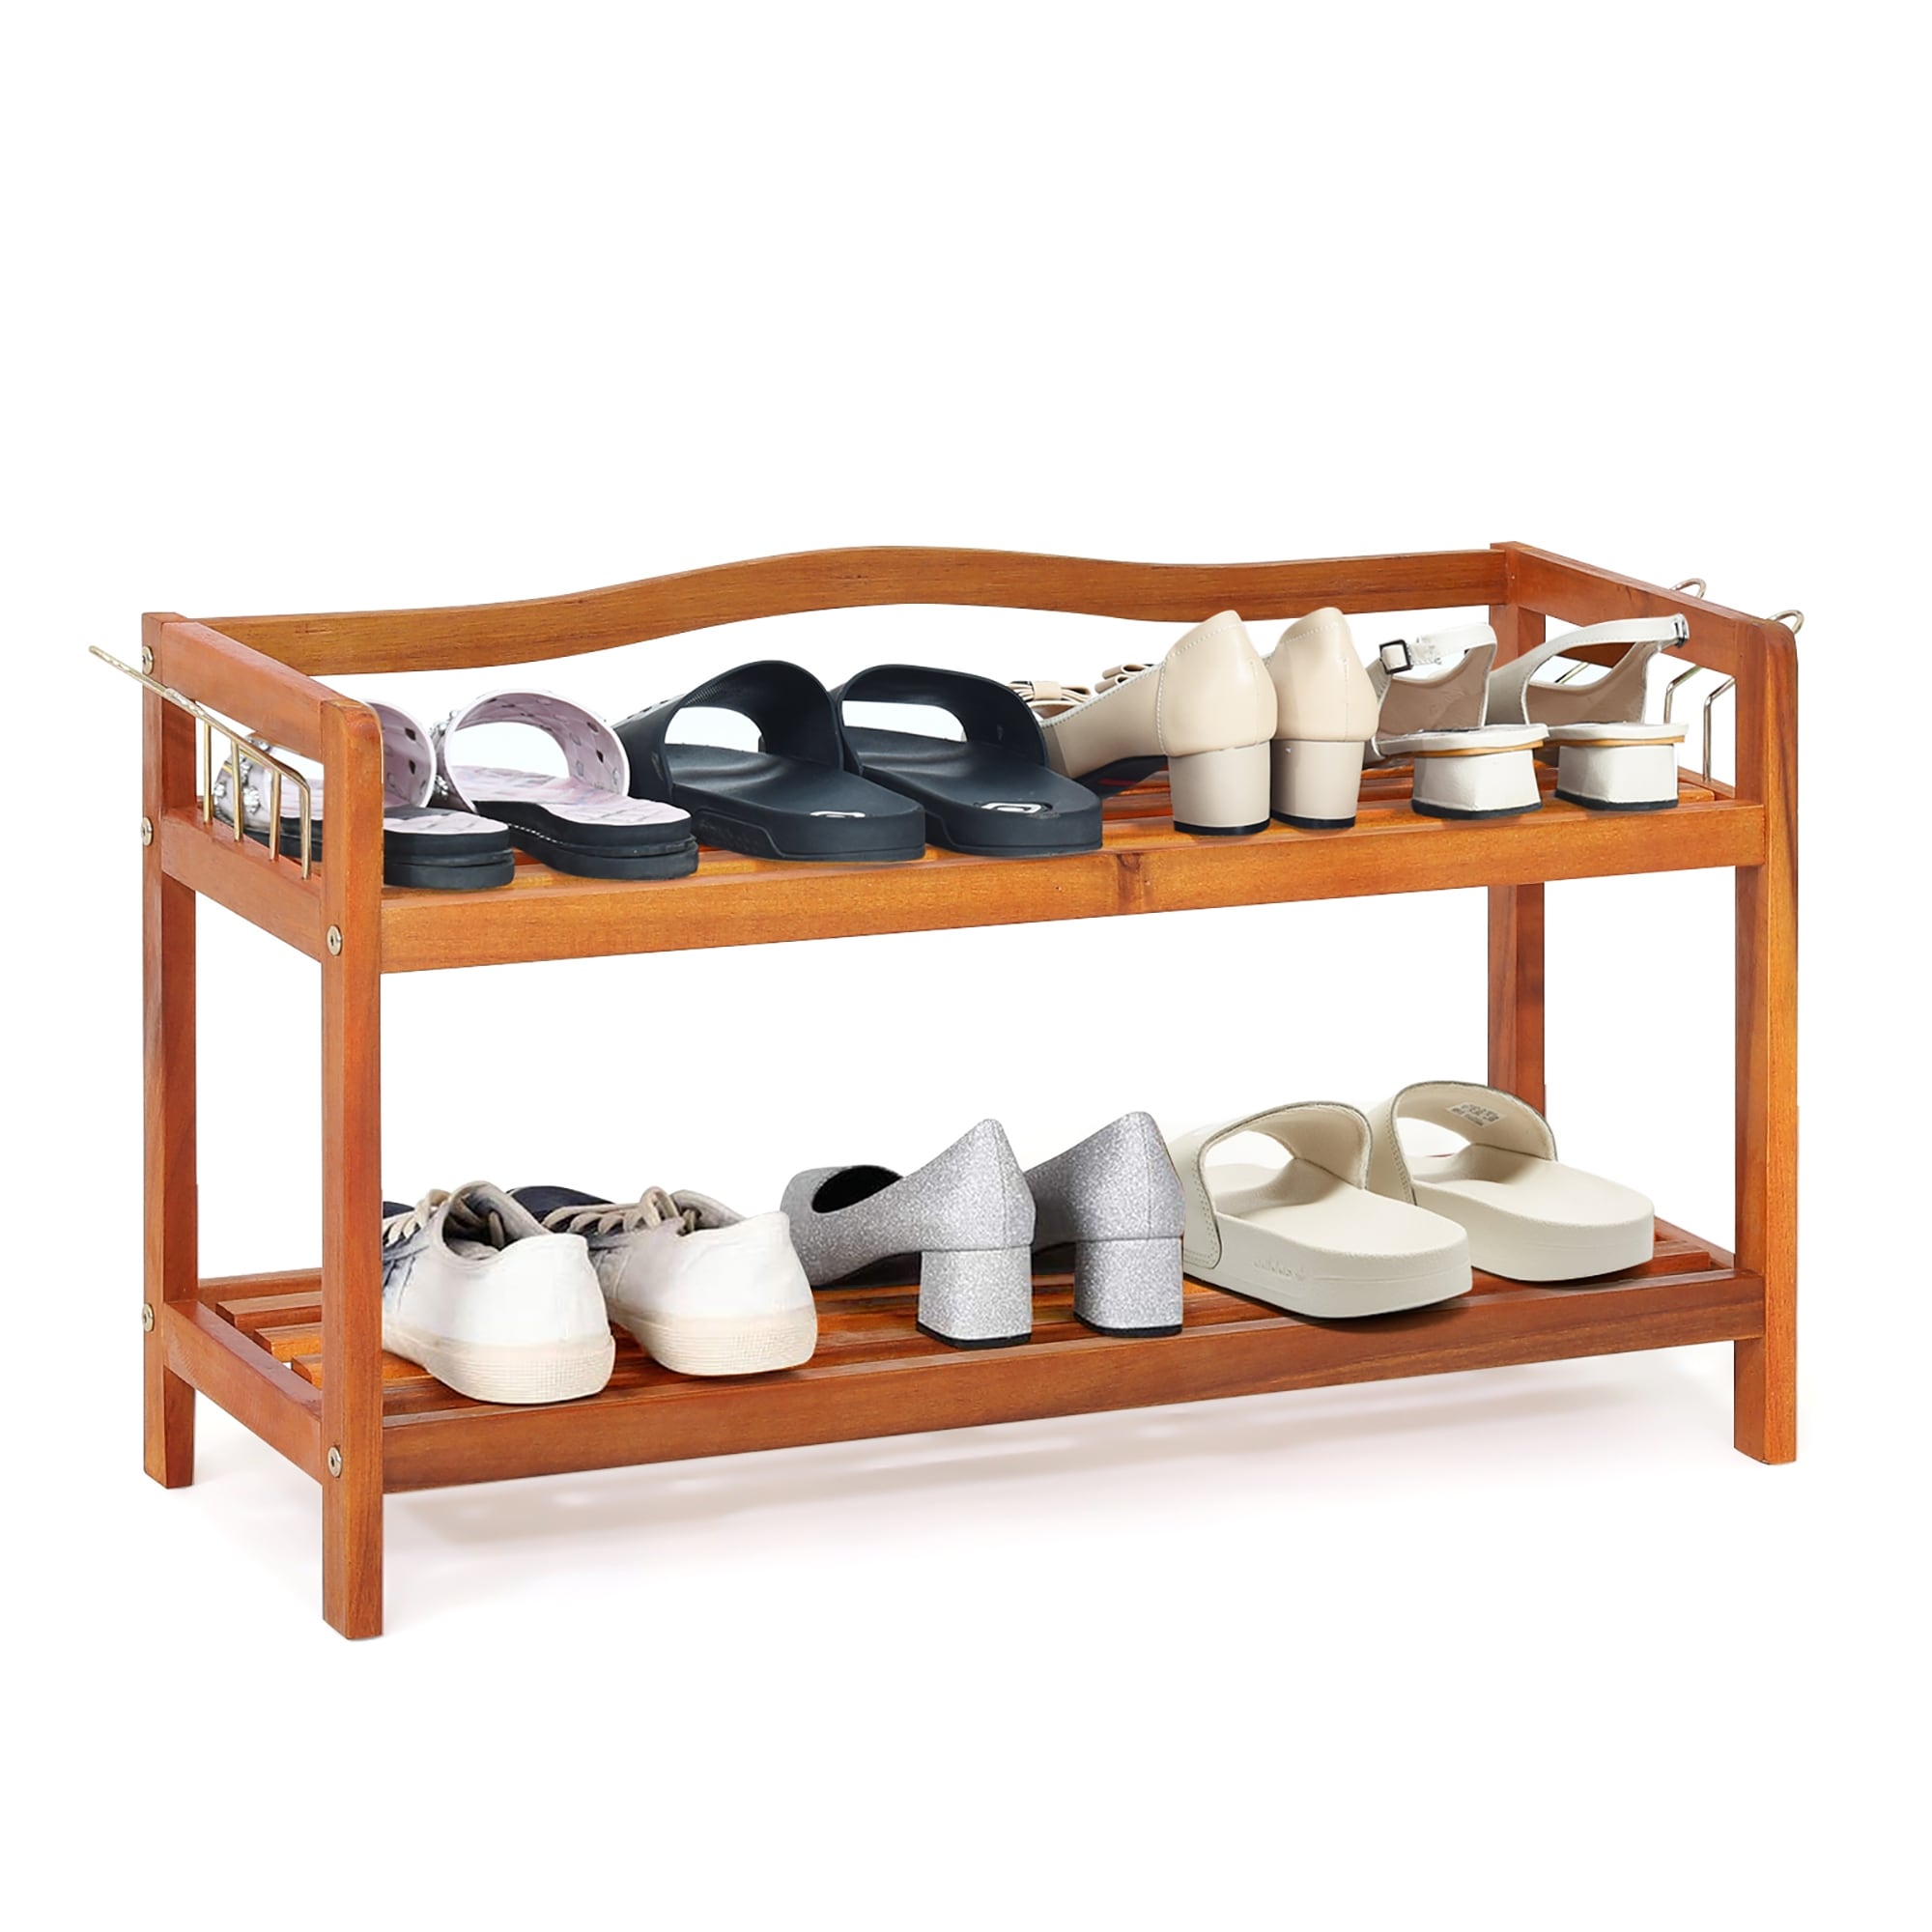 https://ak1.ostkcdn.com/images/products/is/images/direct/4c13bbf7f50e891352d043e21f8ae183bf71d233/Costway-2-Tier-Wood-Shoe-Rack-Freestanding-Shoe-Storage-Organizer.jpg